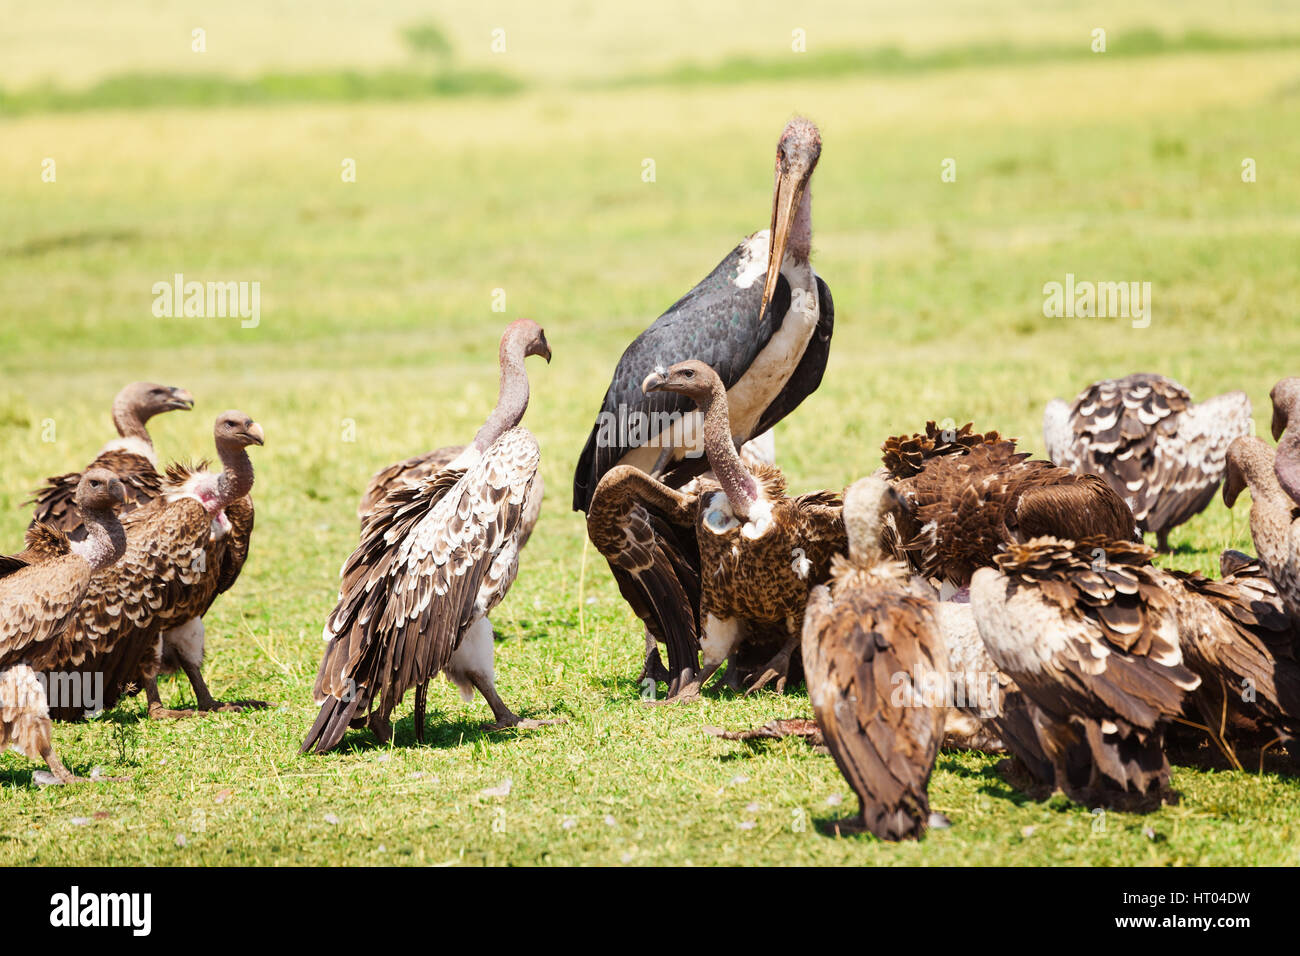 Marabou stork and vultures eating carrion in Kenyan savannah, Africa Stock Photo